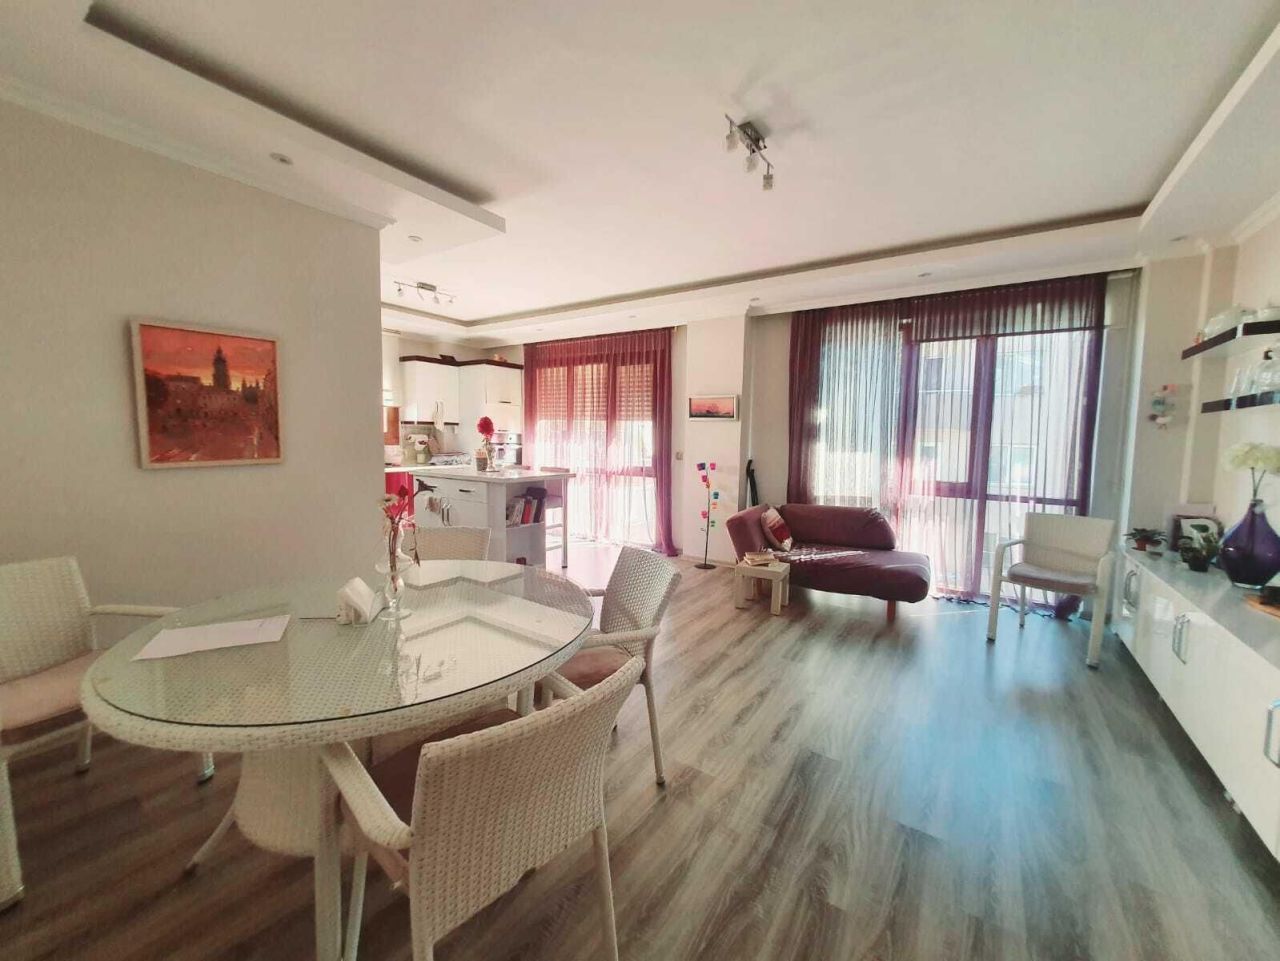 Penthouse in Fethiye, Turkey, 200 sq.m - picture 1